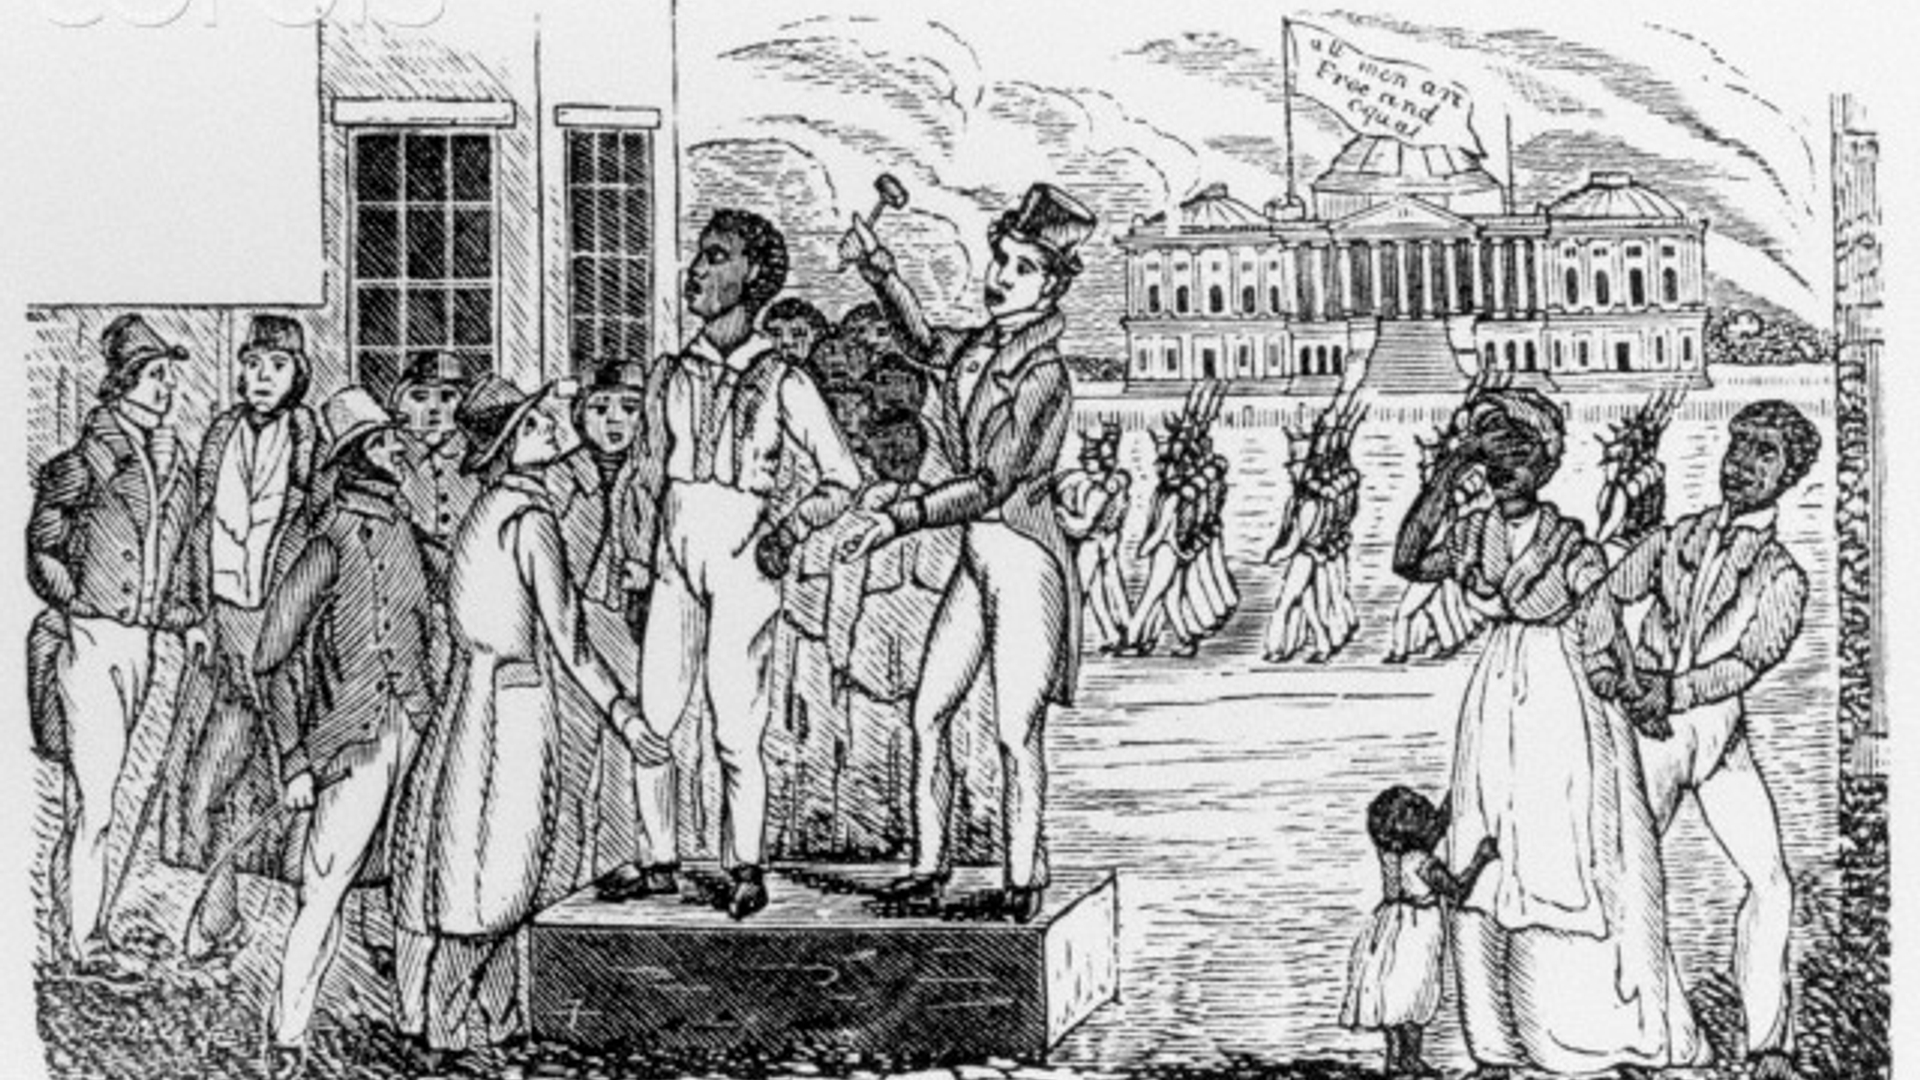 Illustration of a Slave Auction in South Carolina